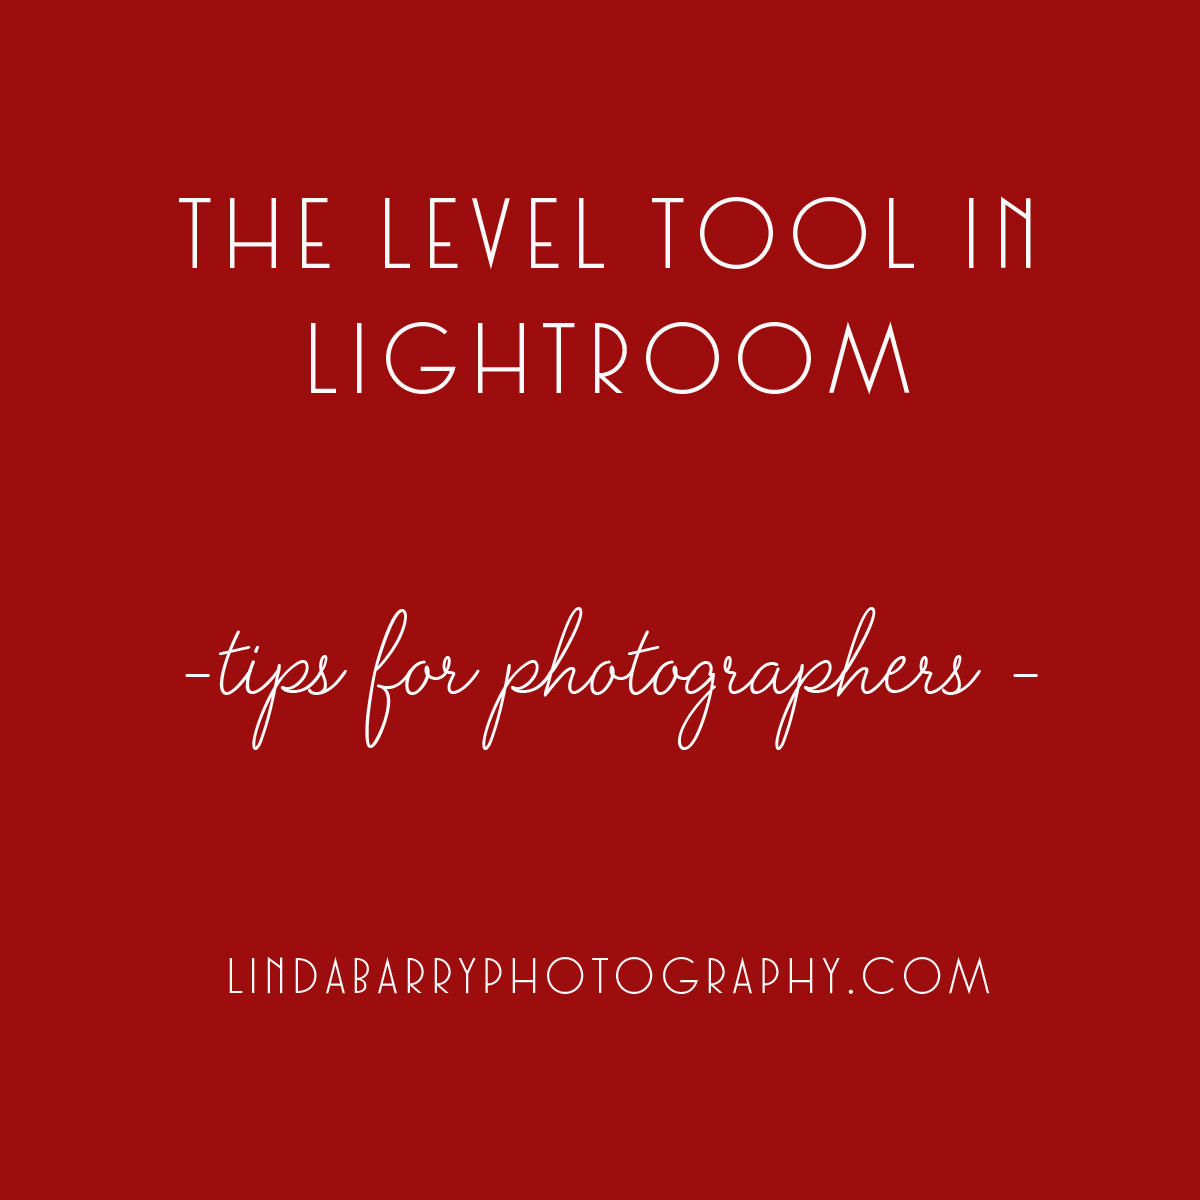 level tool in lightroom by Linda Barry Photography